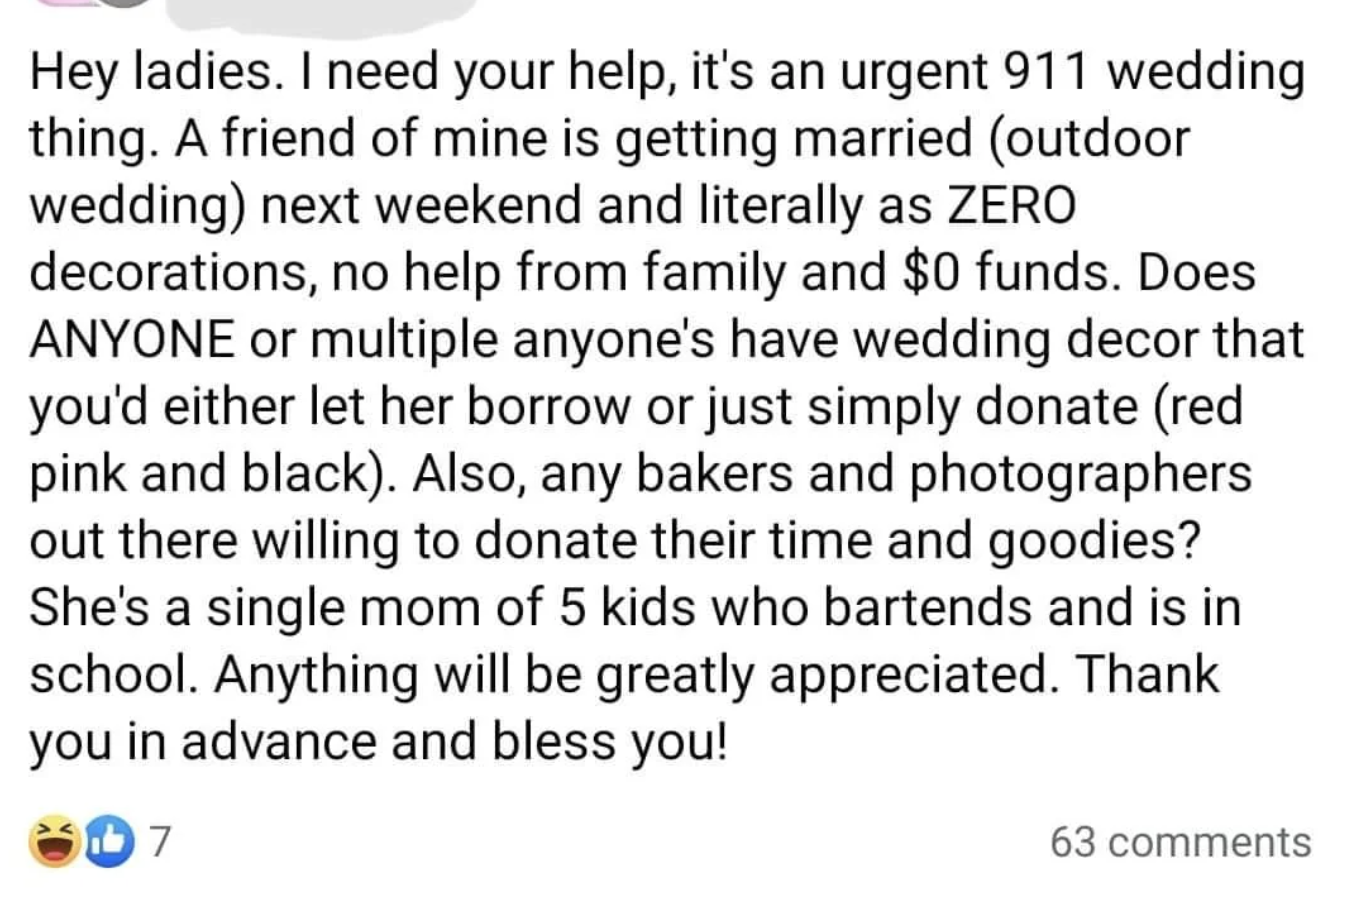 A text plea for free wedding help offering zero funds, seeking decor, photography, and bakers, noting a single mom of five&#x27;s plight